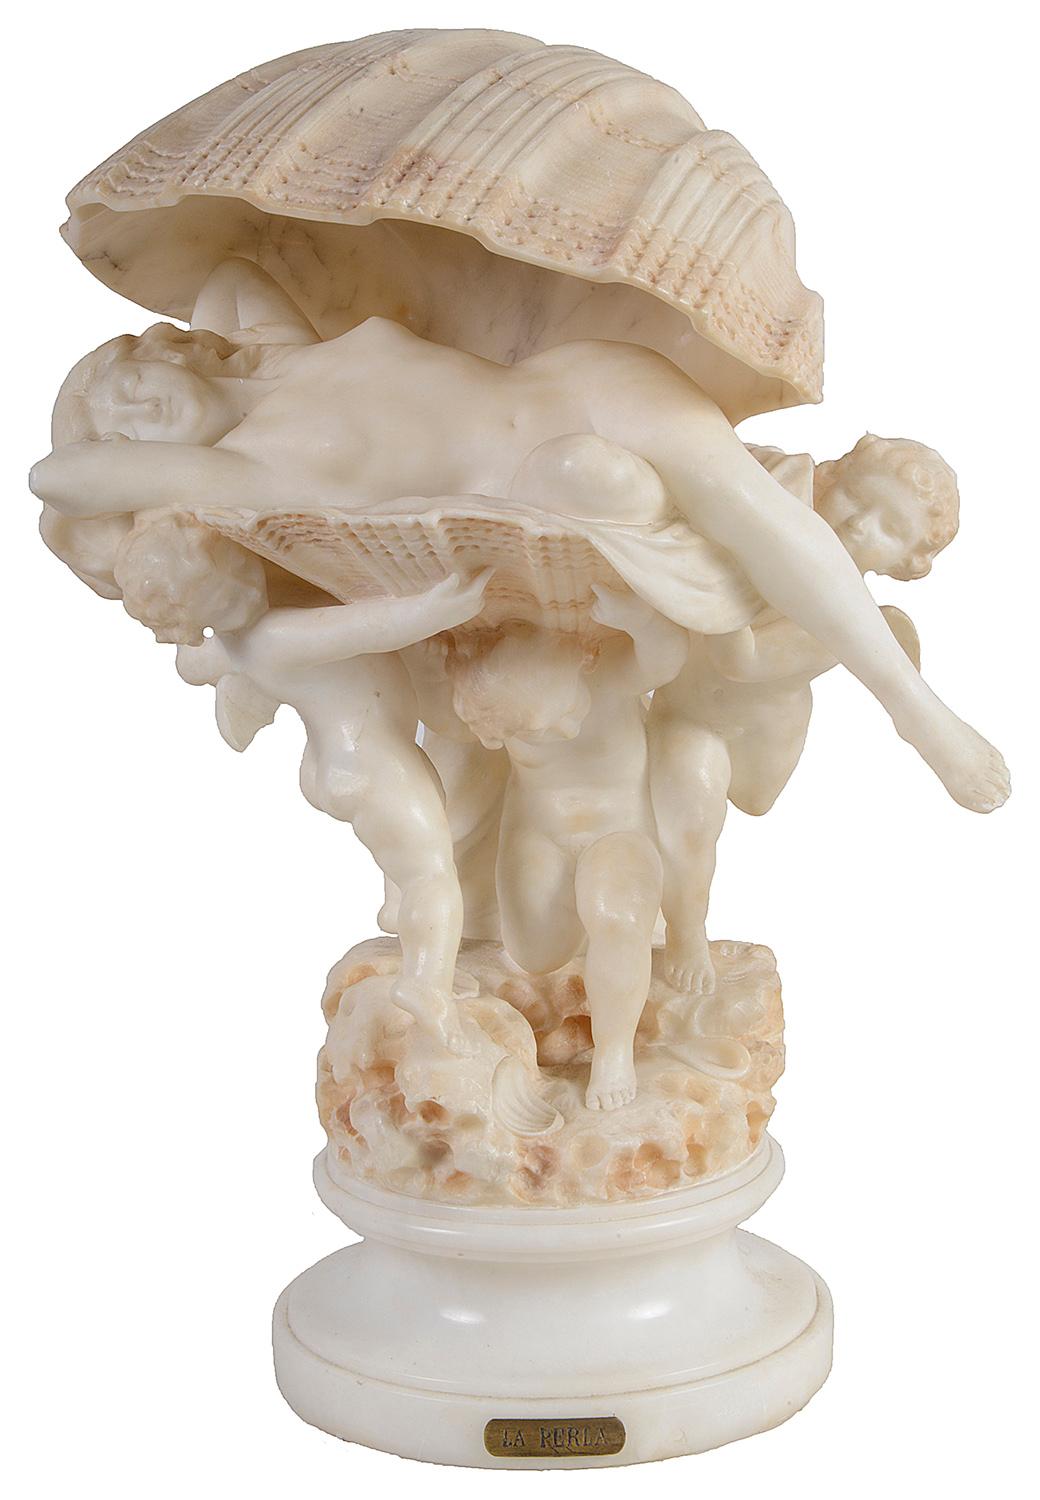 An enchanting carved Alabaster lamp depicting an oyster shell, supported by three cherubs with a sleeping nymph within, circa 1920. Measures: 42 cm (16.5